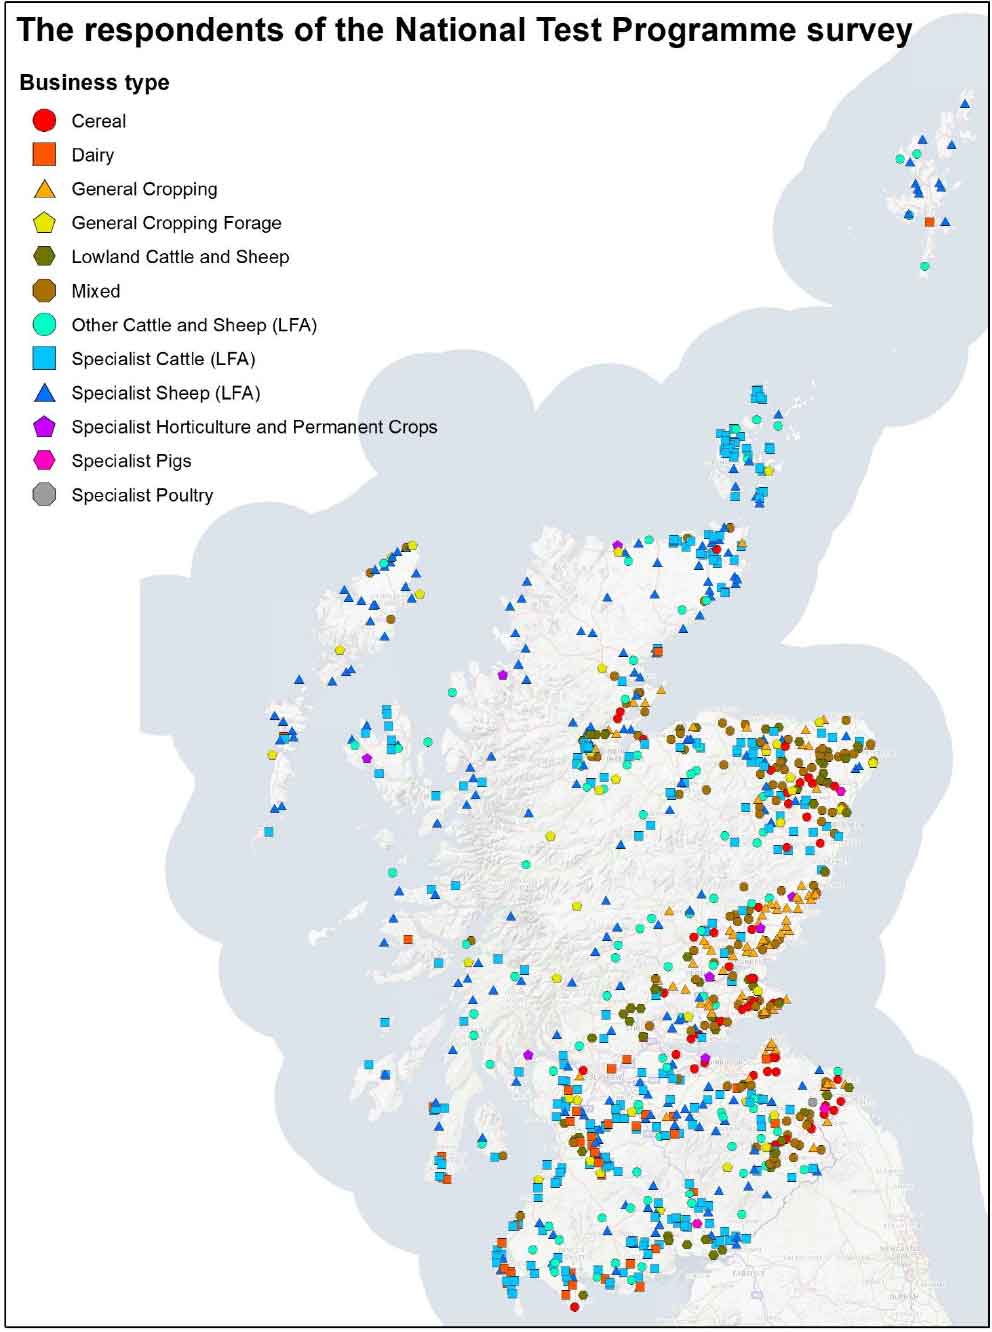 Map of Scotland displaying all respondents locations, categorised by their business type.